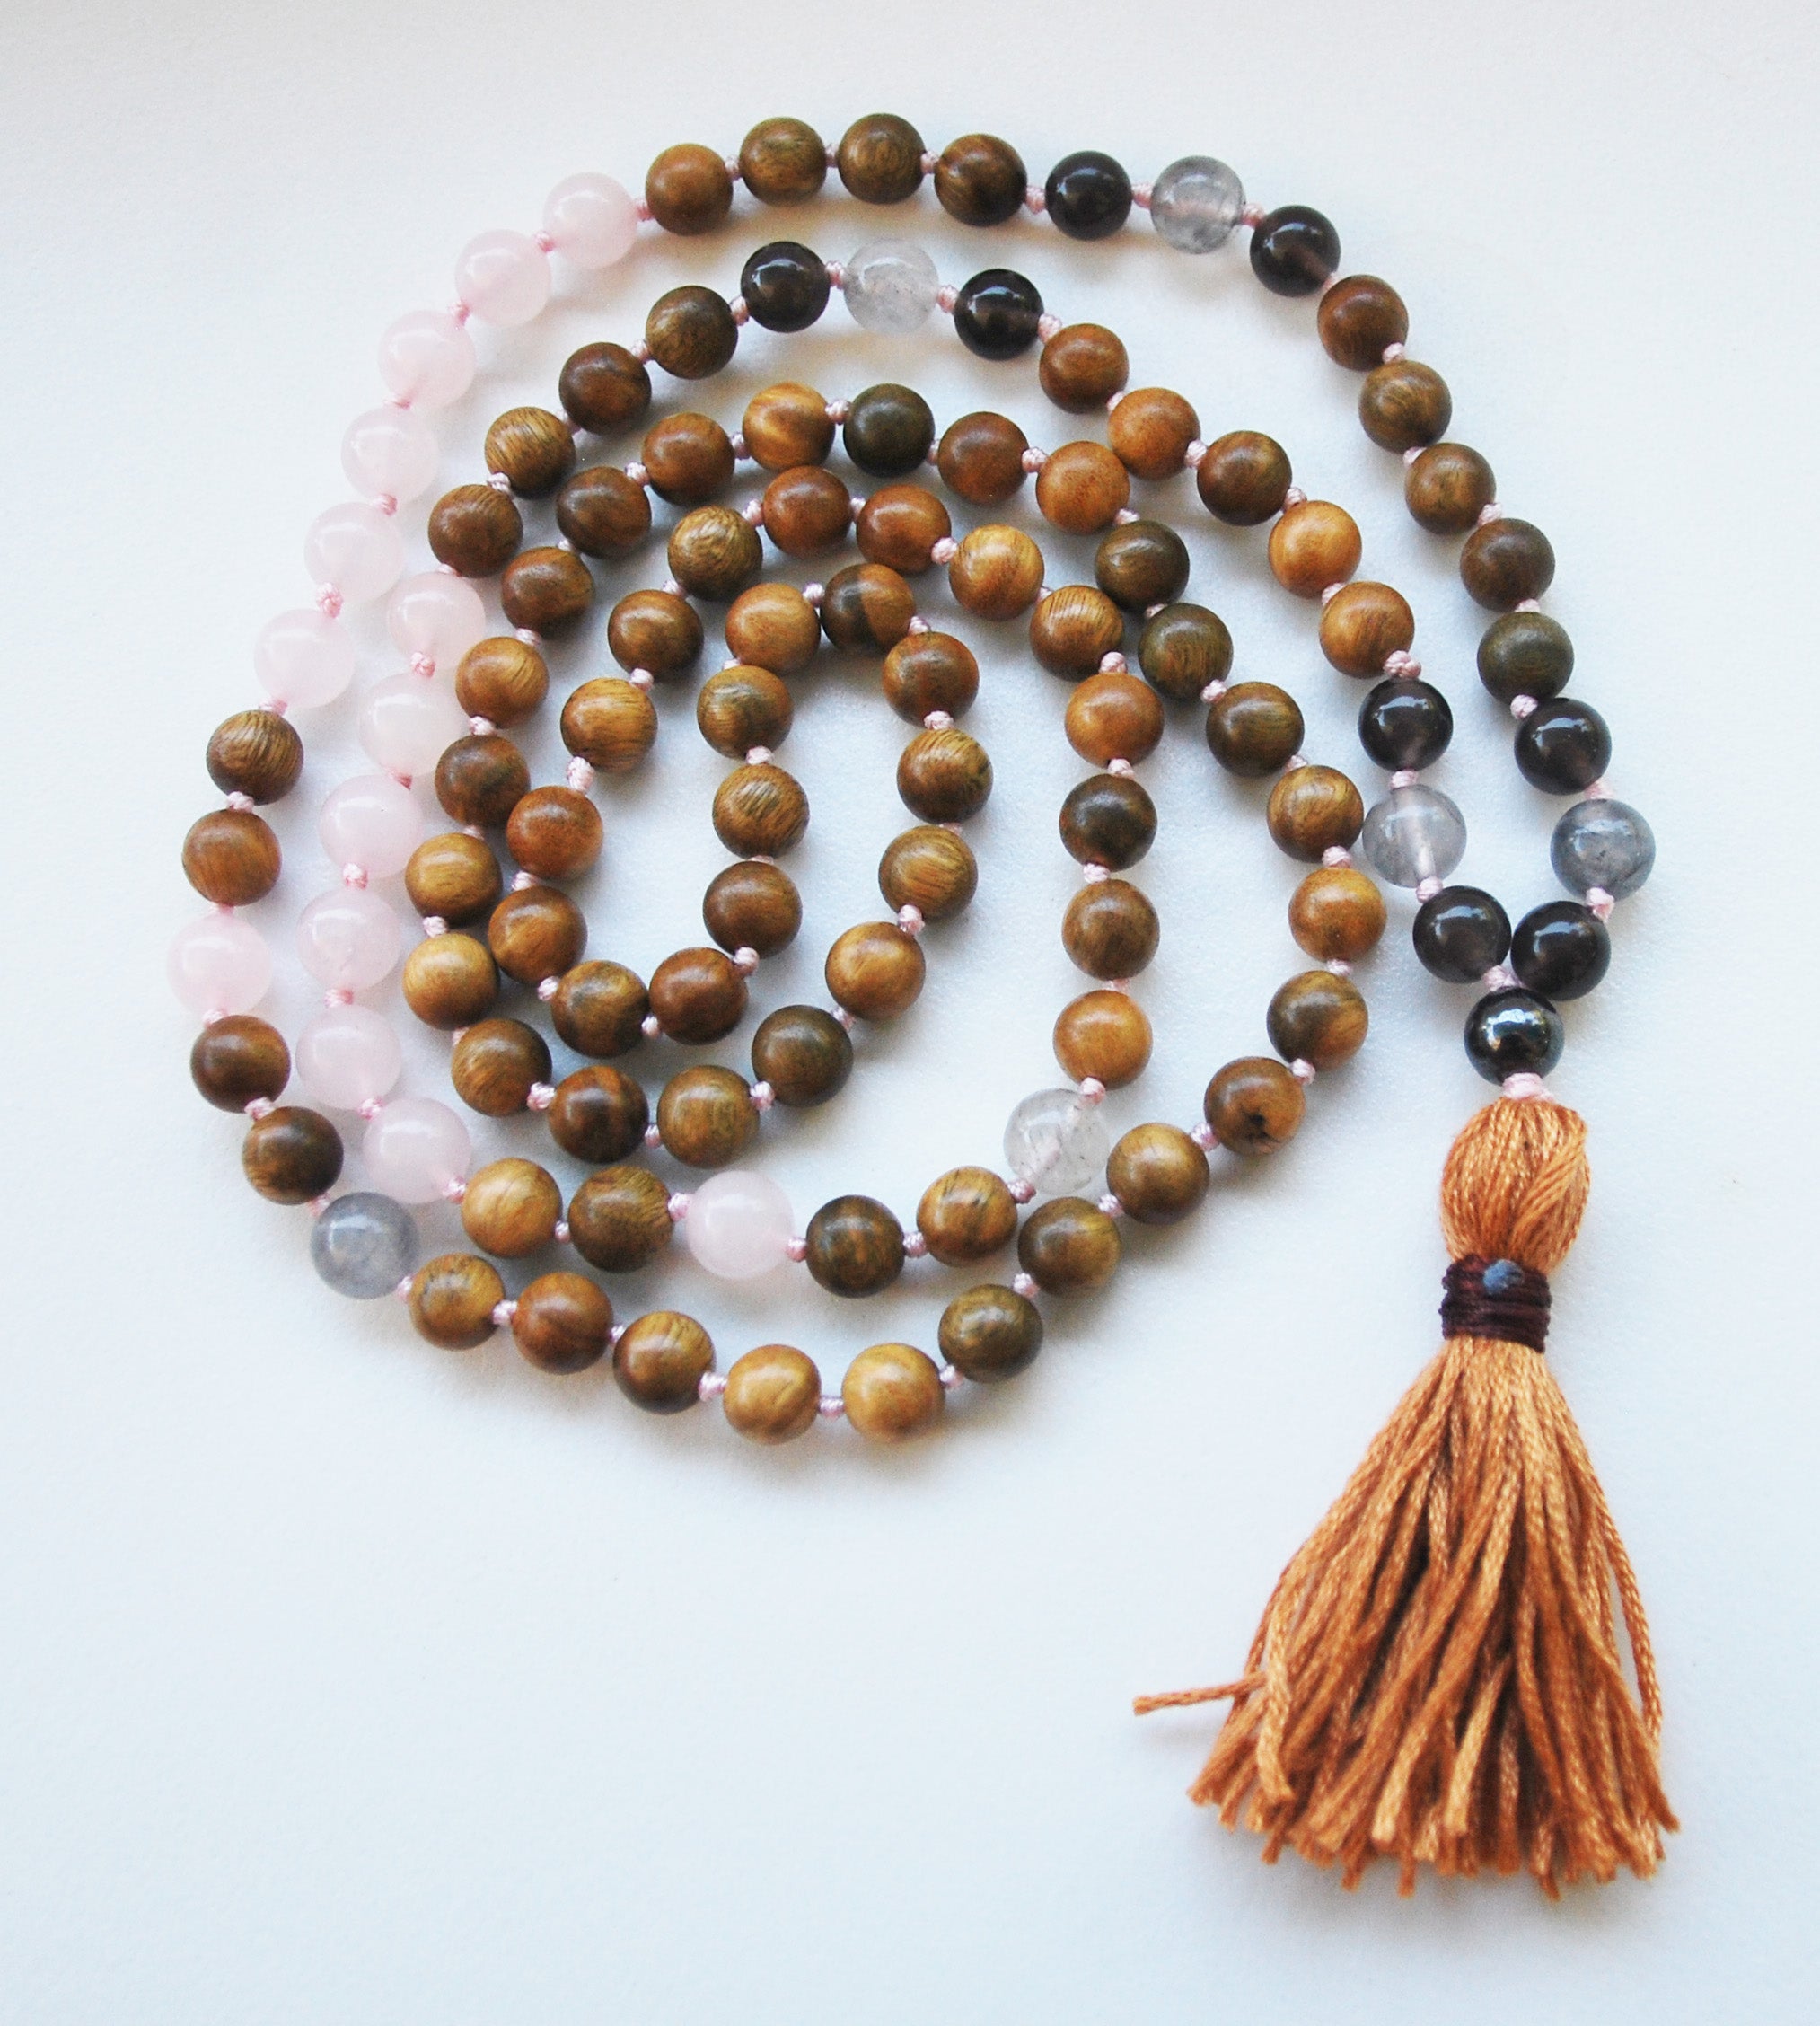 8mm Green Sandalwood & Rose Quartz 108 Knotted Mala Necklace with Cotton Tassel